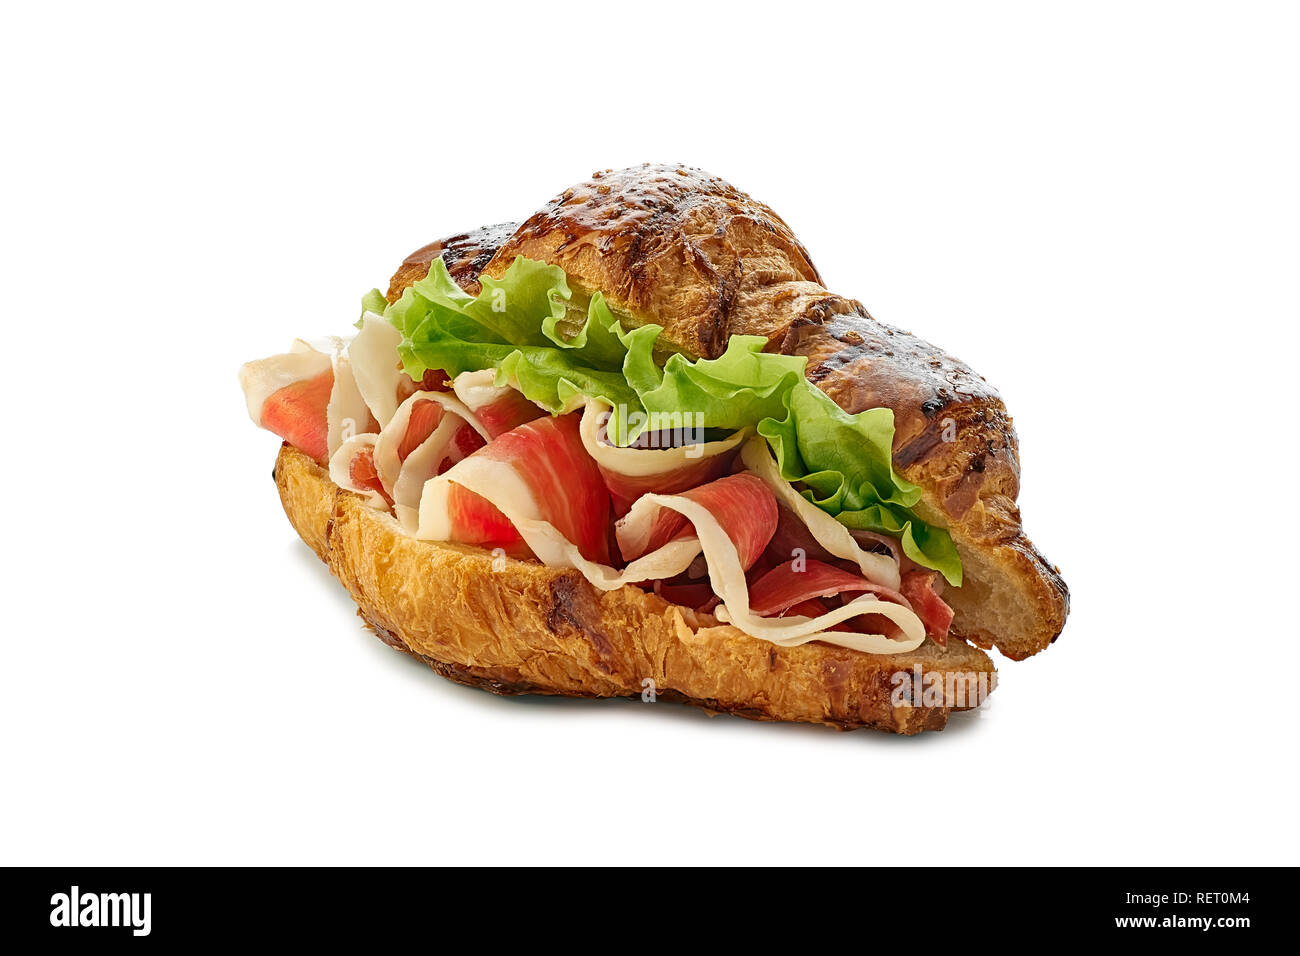 Croissant sandwich with jamon of ham and lettuce on white Stock Photo